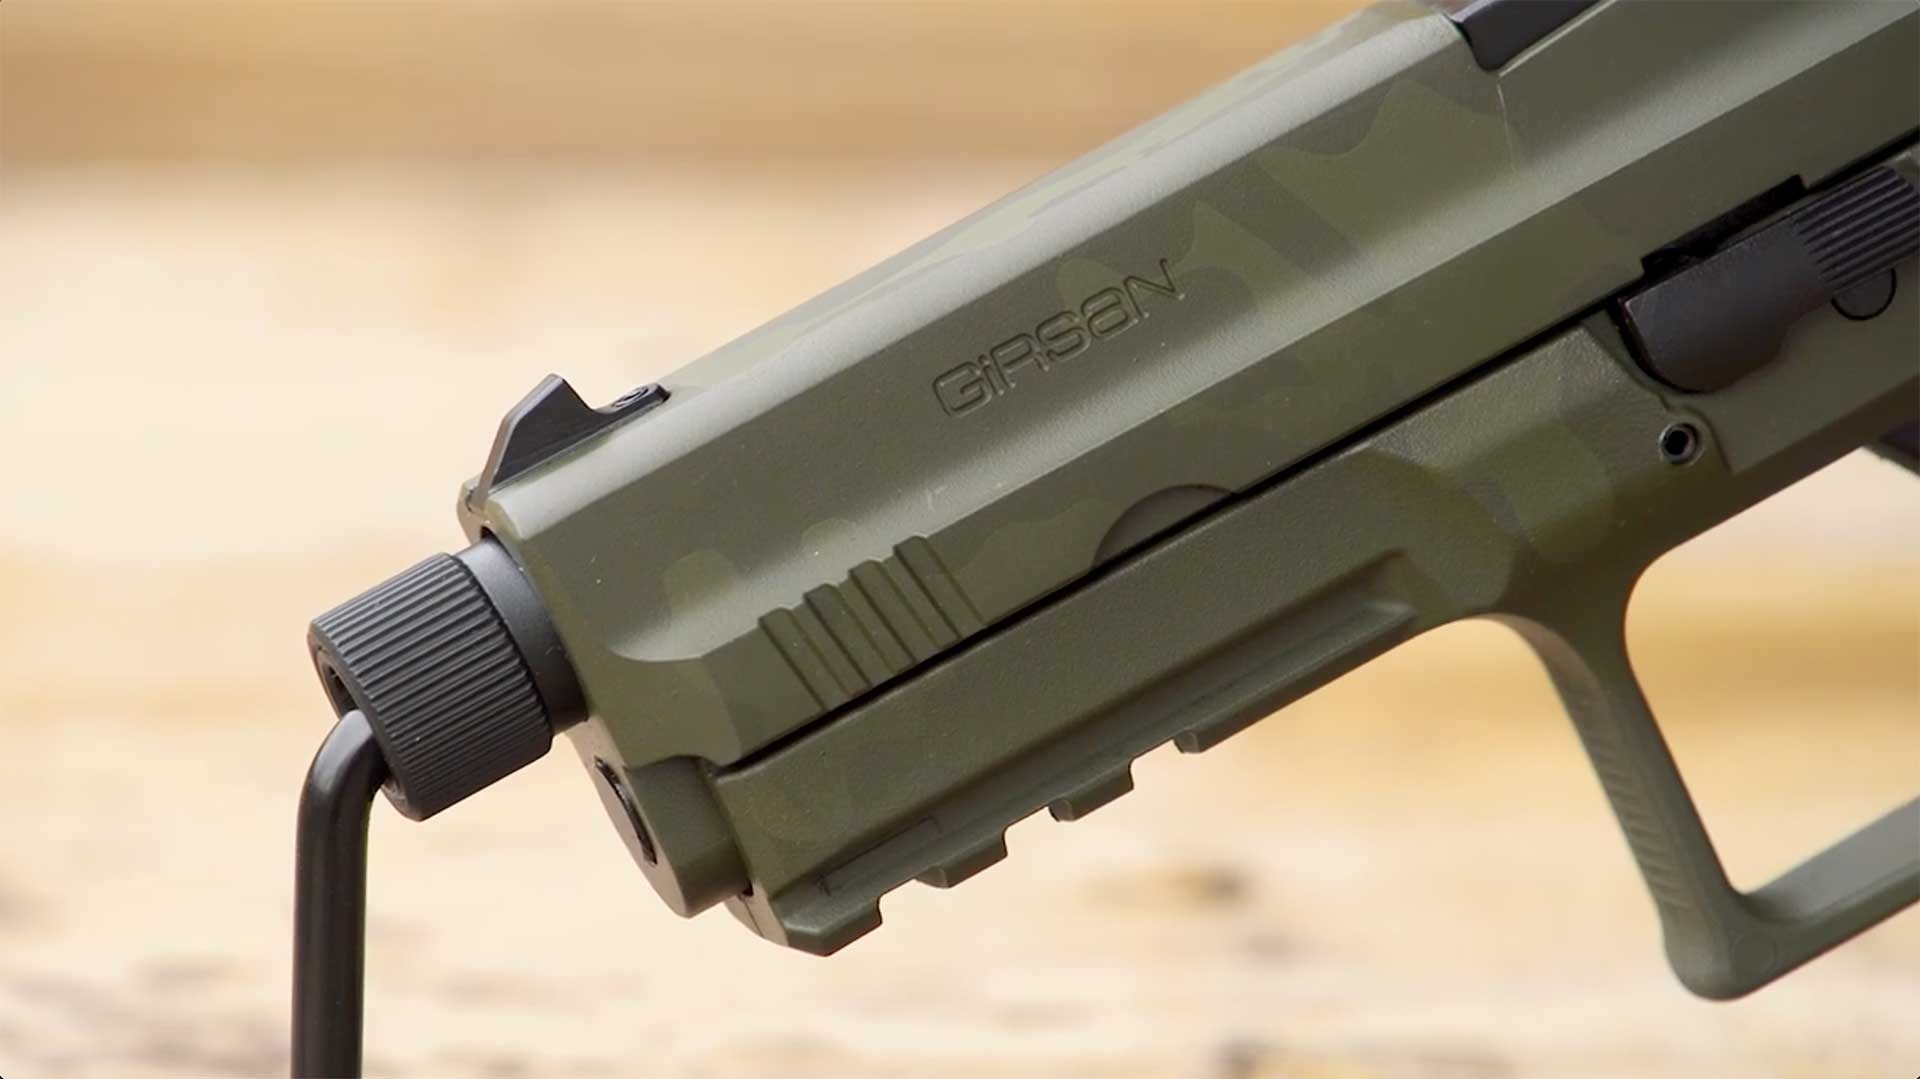 A black thread cap sits at the muzzle end of the EAA Girsan MC9 Disruptor's green slide.